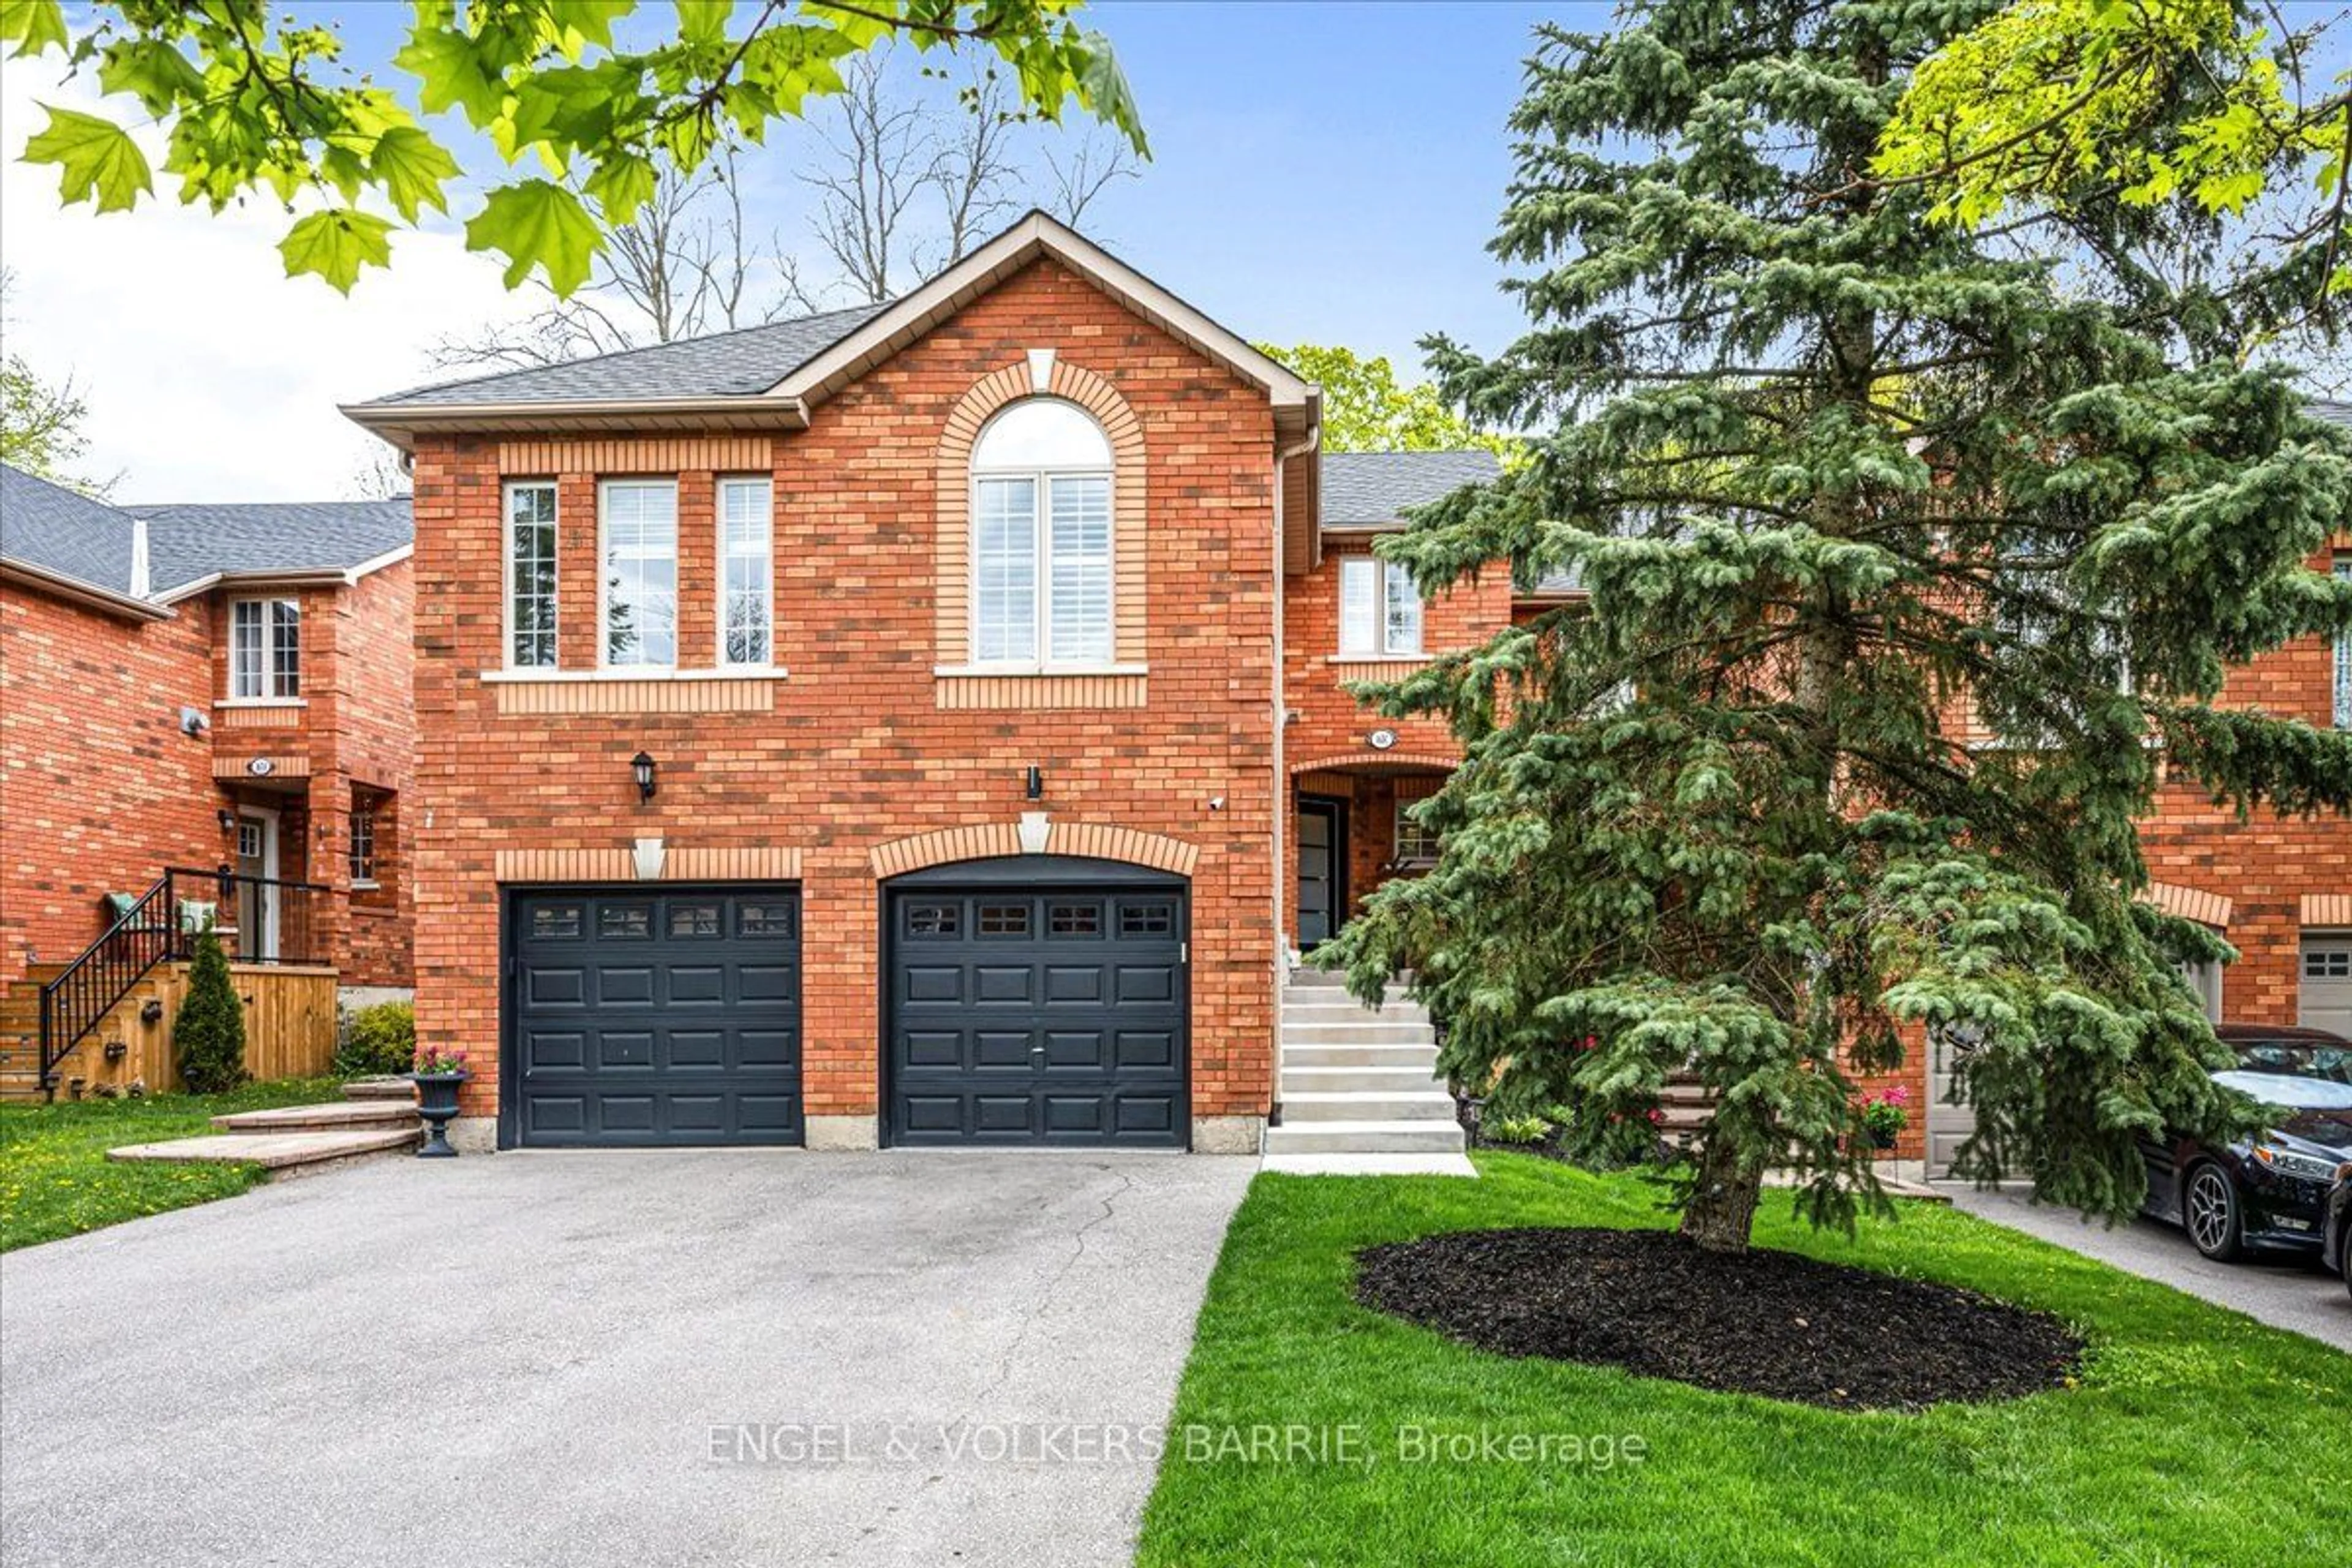 Home with brick exterior material for 163 Owen St, Barrie Ontario L4M 3H8